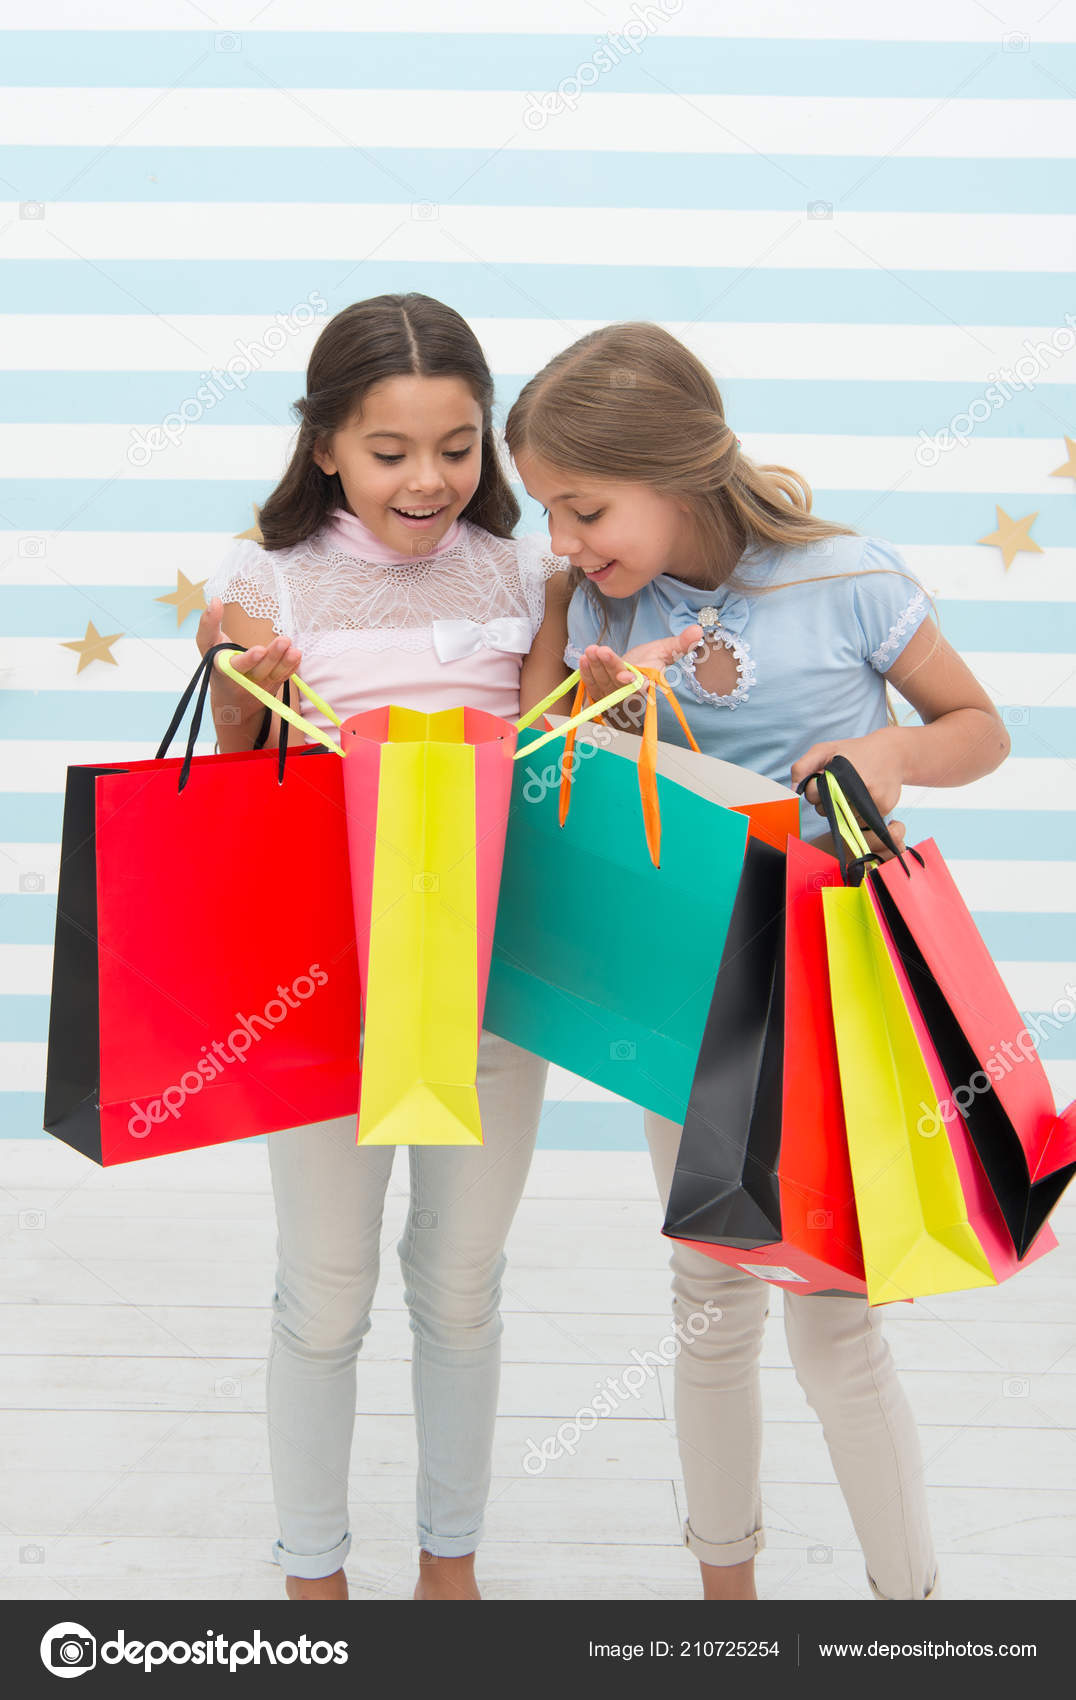 Shopping Bags Photos, Download The BEST Free Shopping Bags Stock